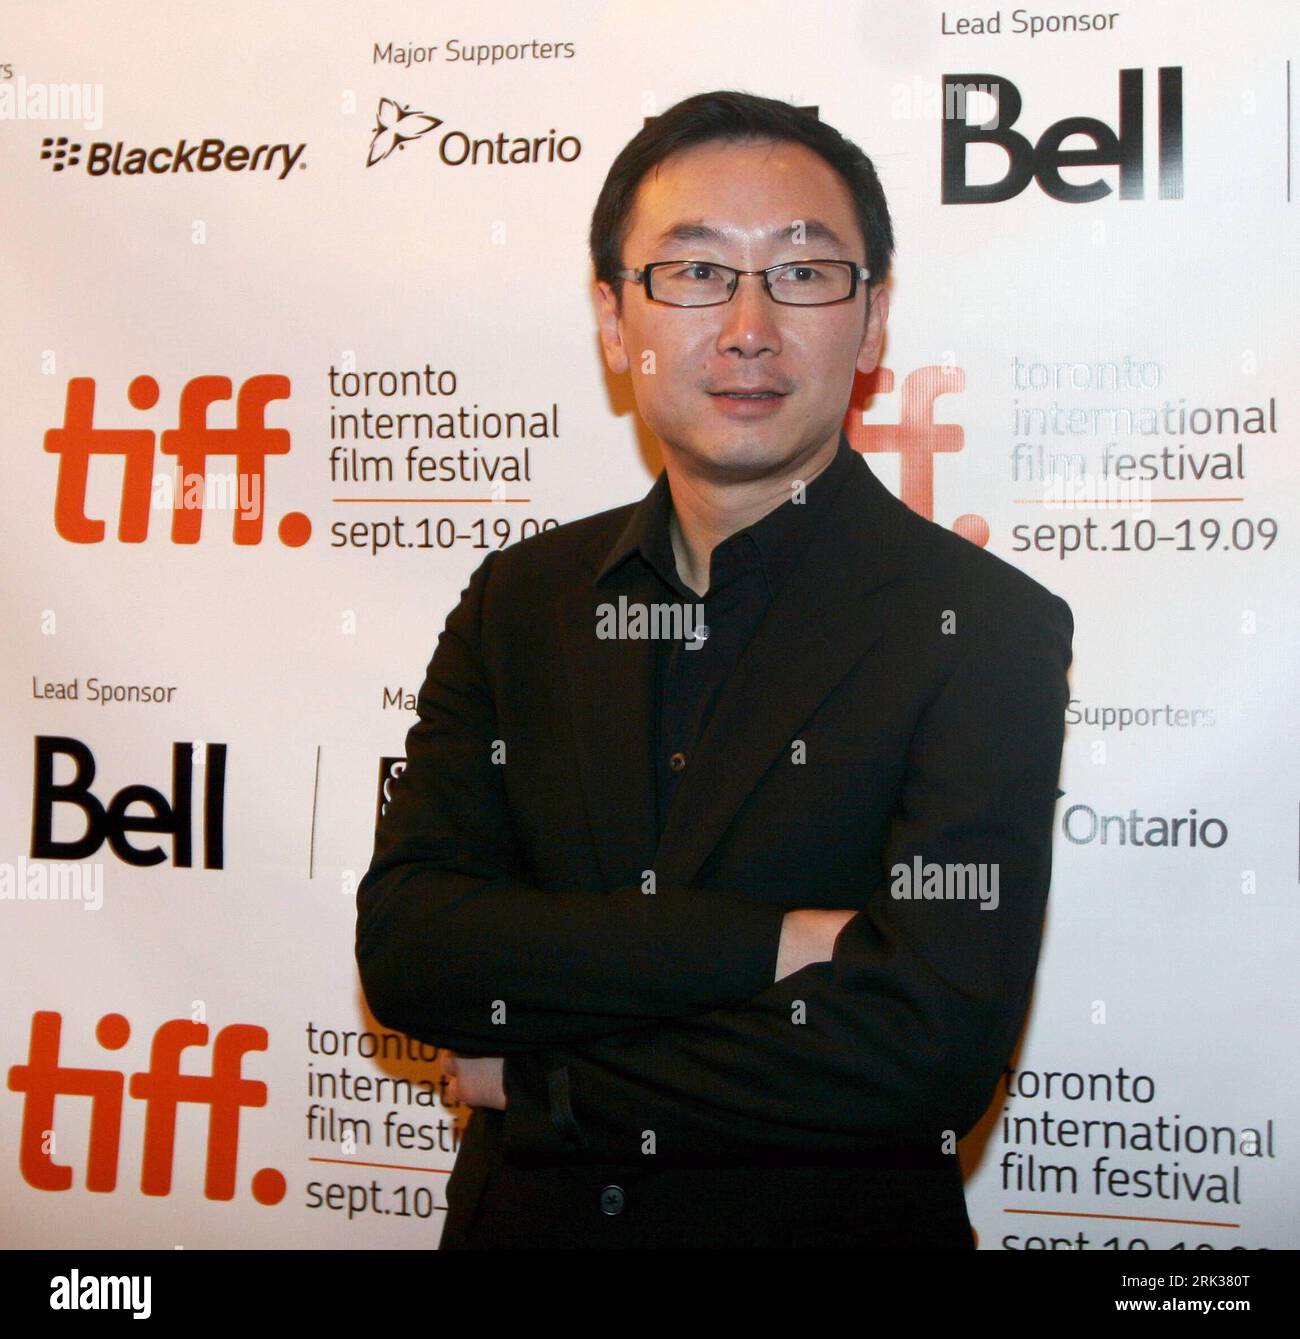 Bildnummer: 53350962  Datum: 12.09.2009  Copyright: imago/Xinhua (090912) -- TORONTO, Sept. 12, 2009 (Xinhua) -- Chinese director Lu Chuan arrives for the screening of the film City of Life and Death during the 34th Toronto International Film Festival Sept. 11, 2009. The festival runs from Sept. 10 to 19. (Xinhua/Zou Zheng) (gj) (1)CANADA-TORONTO-FILM FESTIVAL-CITY OF LIFE AND DEATH PUBLICATIONxNOTxINxCHN People Film Festival Toronto Filmfestival kbdig xcb 2009 quer premiumd o0 tiff . o00 Porträt    Bildnummer 53350962 Date 12 09 2009 Copyright Imago XINHUA  Toronto Sept 12 2009 XINHUA Chinese Stock Photo